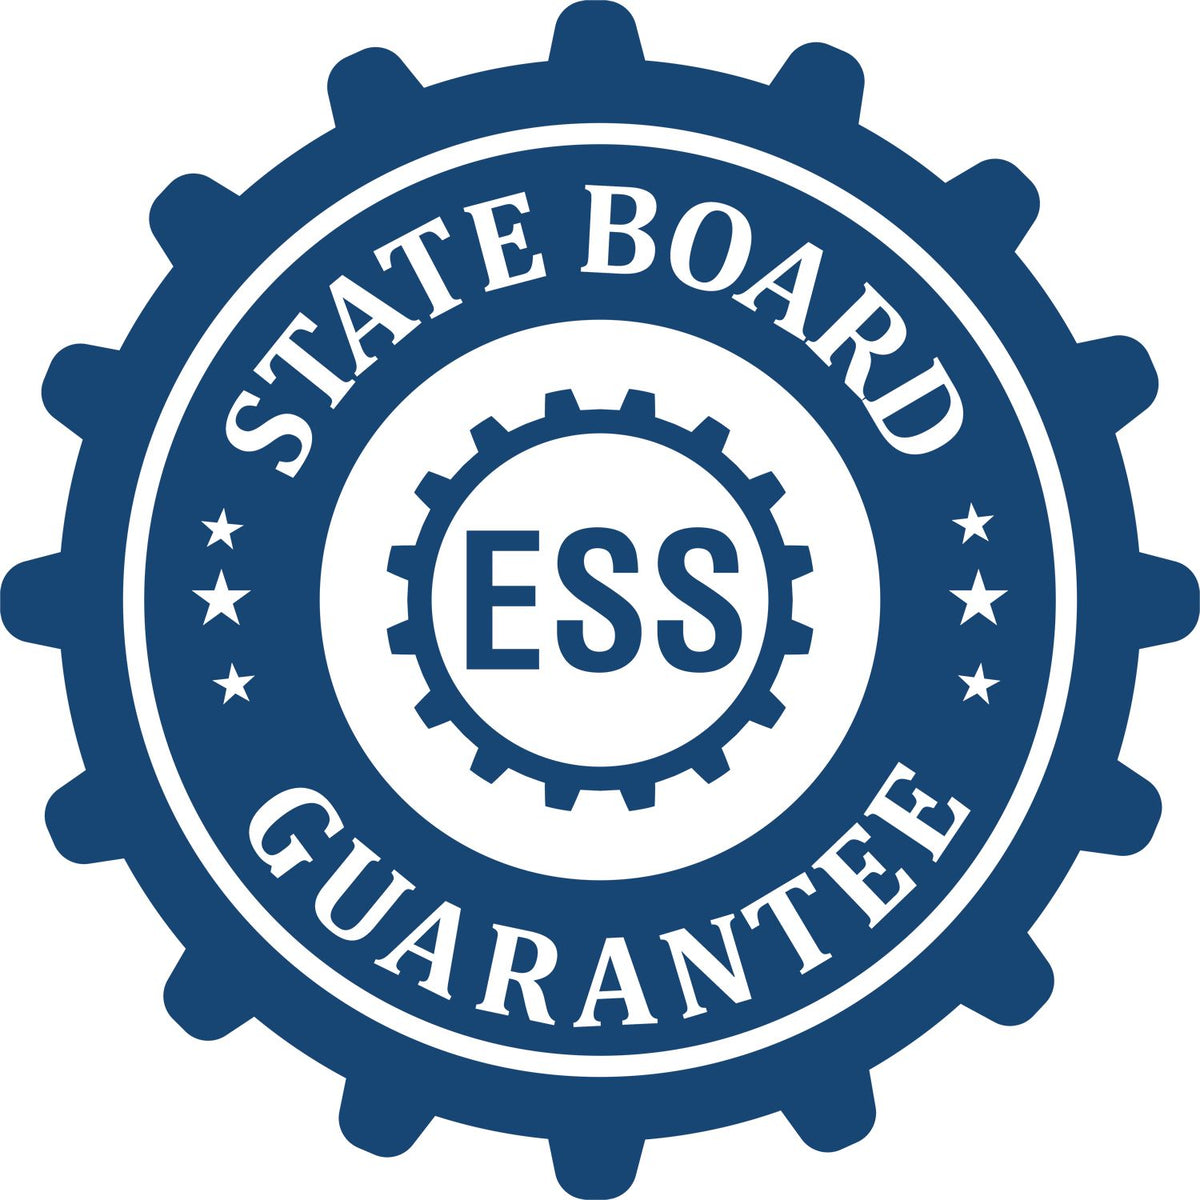 An emblem in a gear shape illustrating a state board guarantee for the State of Ohio Extended Long Reach Engineer Seal product.